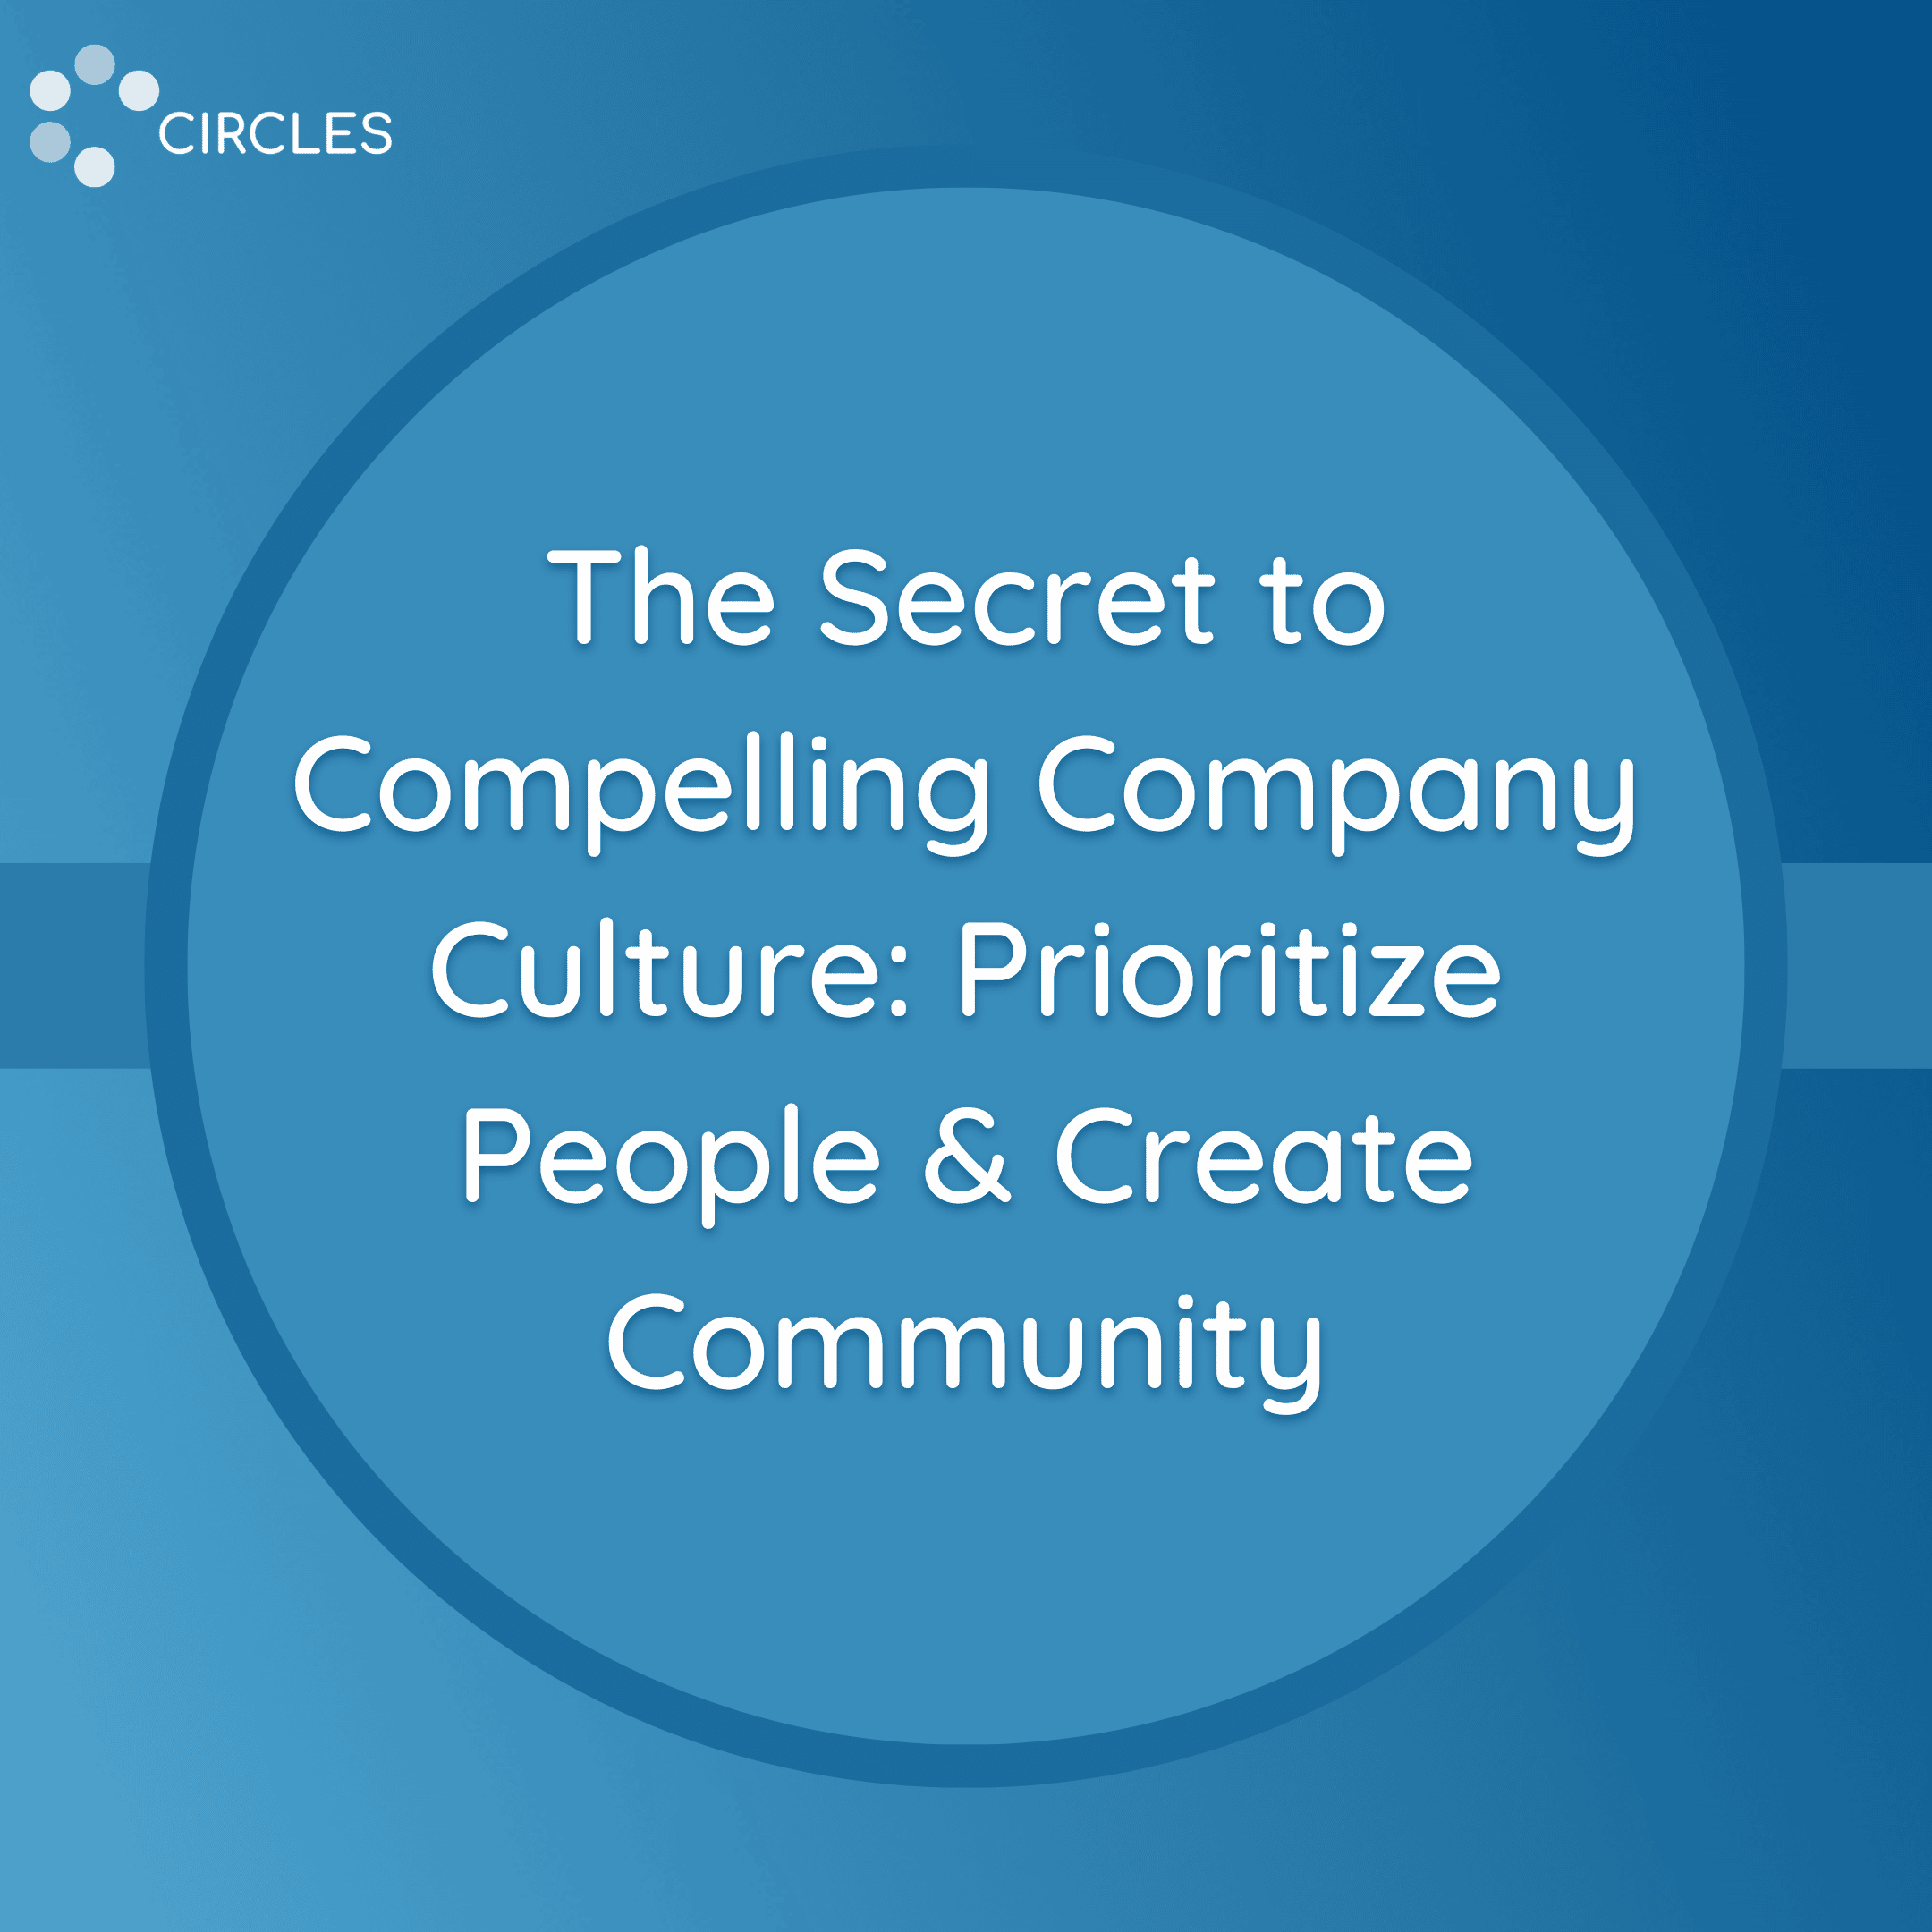 The Secret to Compelling Company Culture: Prioritize People & Create Community